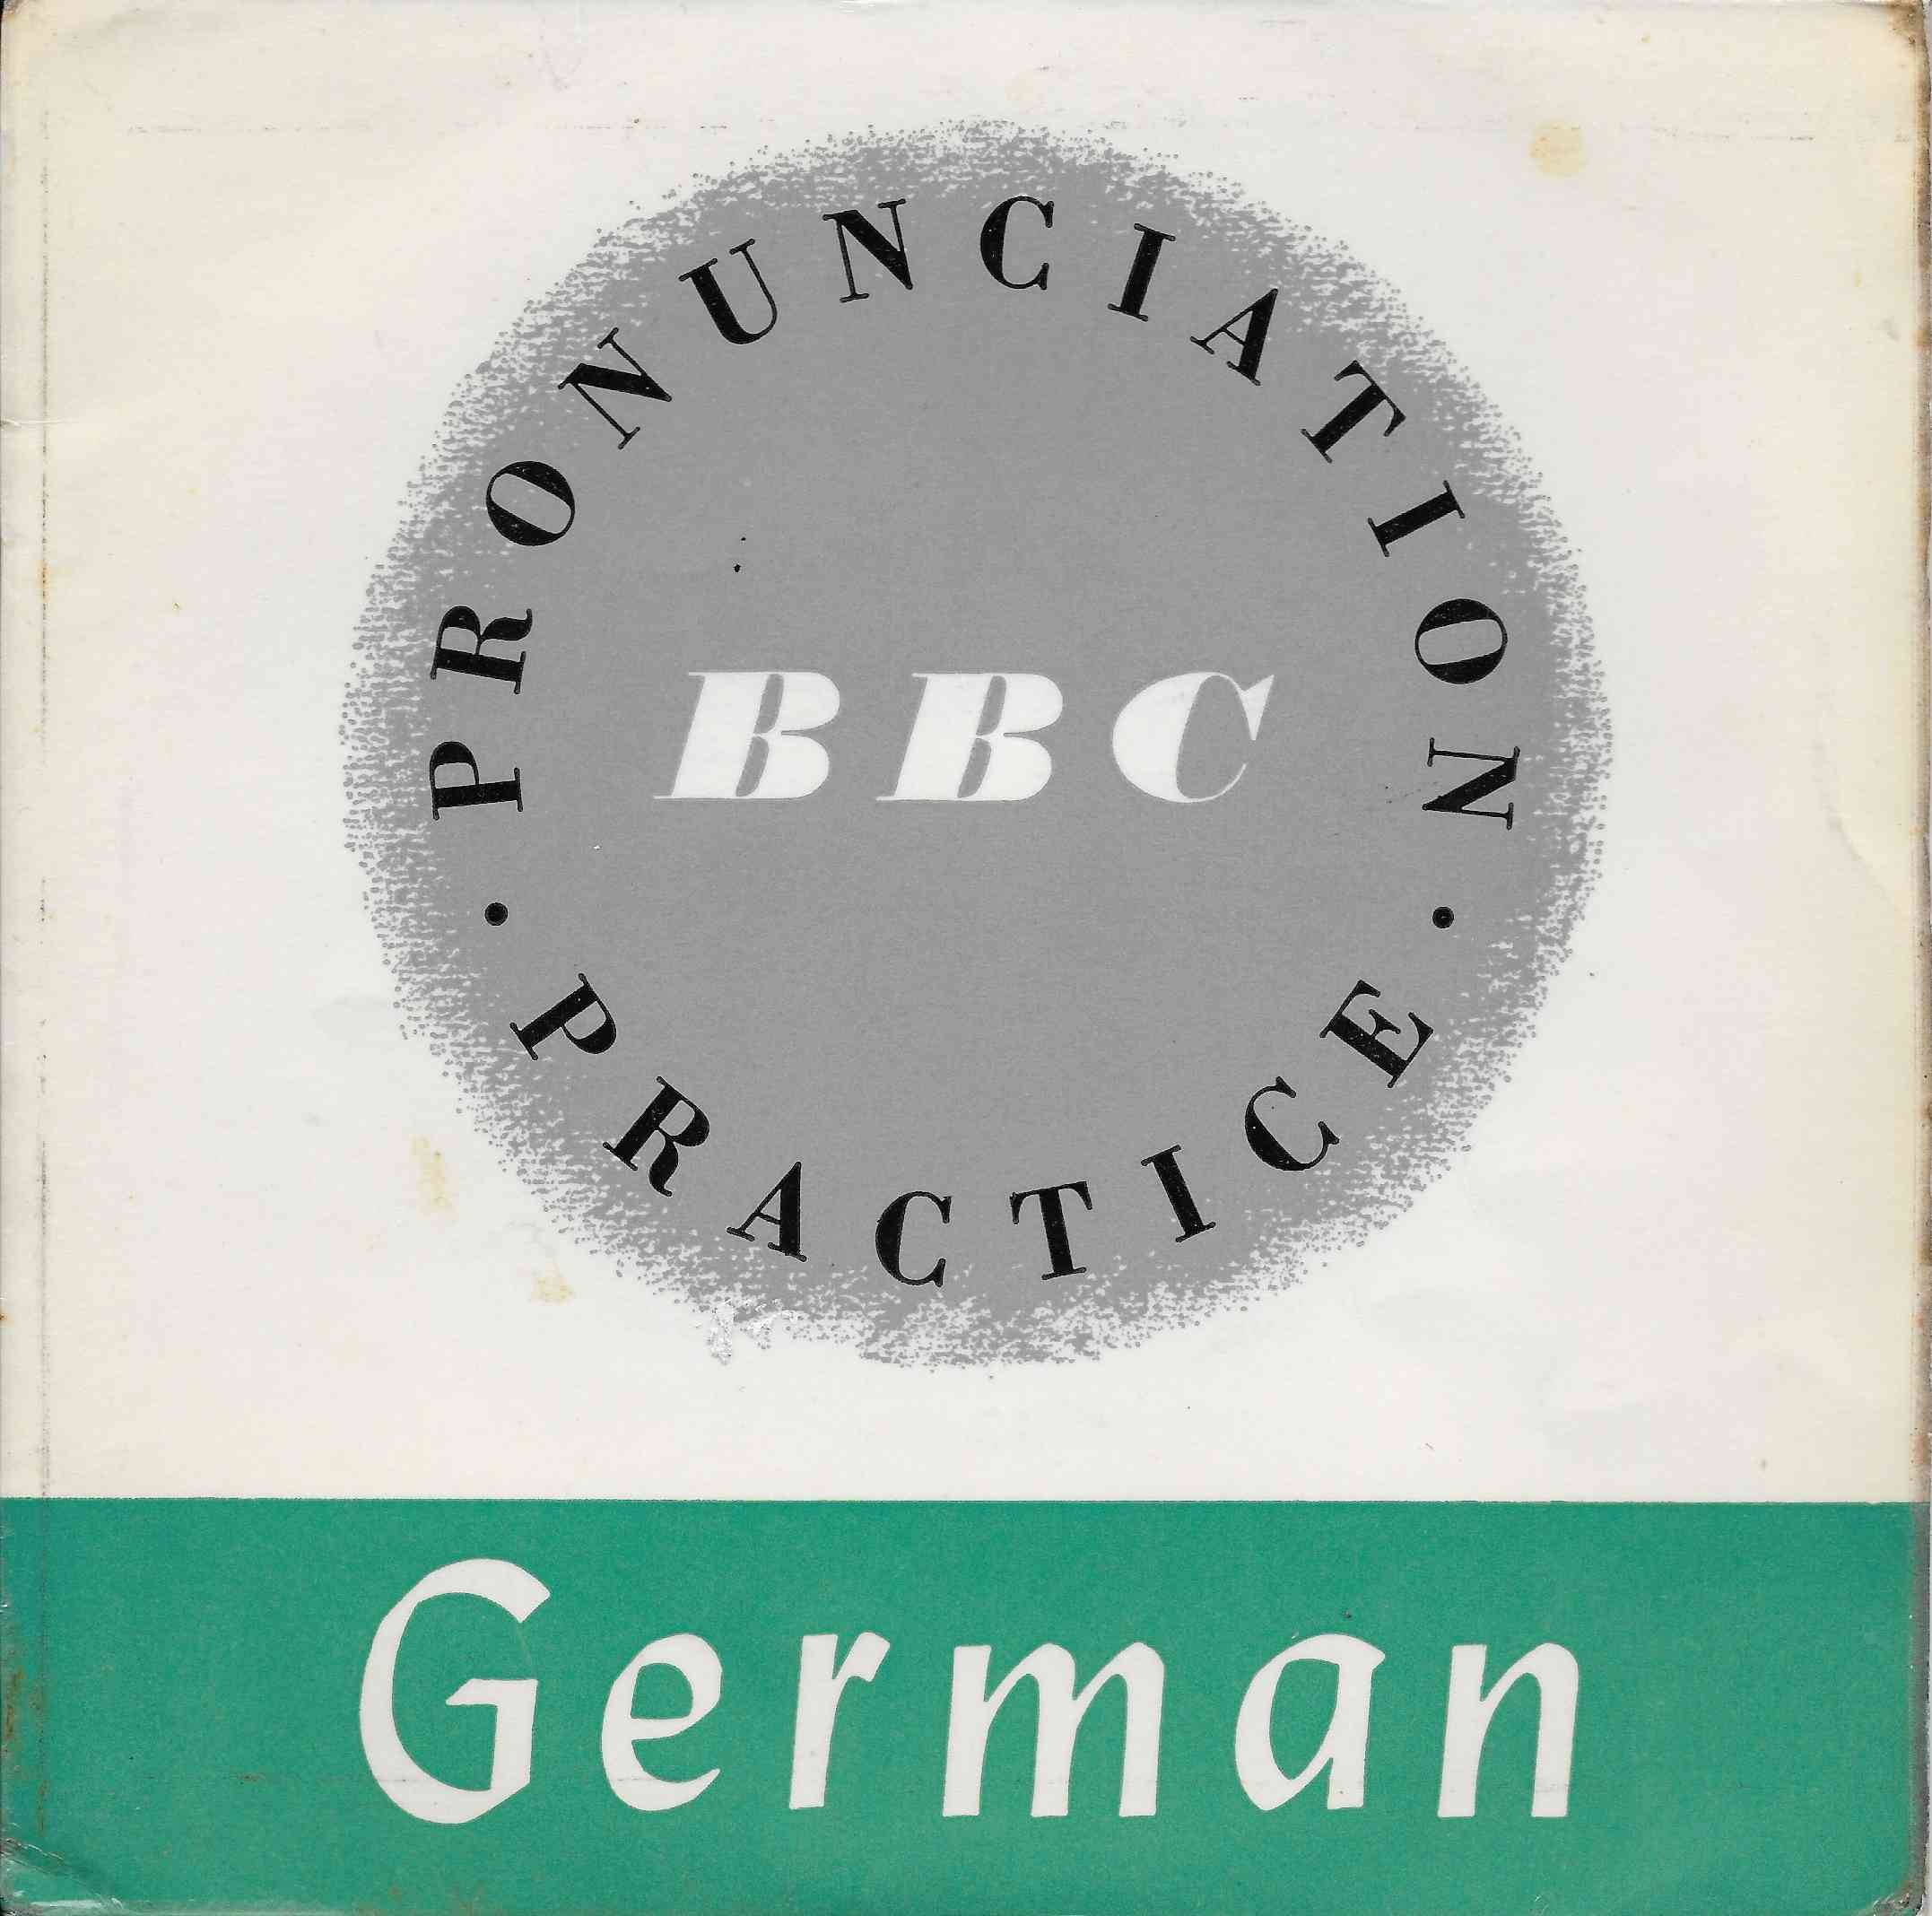 Picture of GER-A-1 German single by artist John L. M. Trim from the BBC records and Tapes library